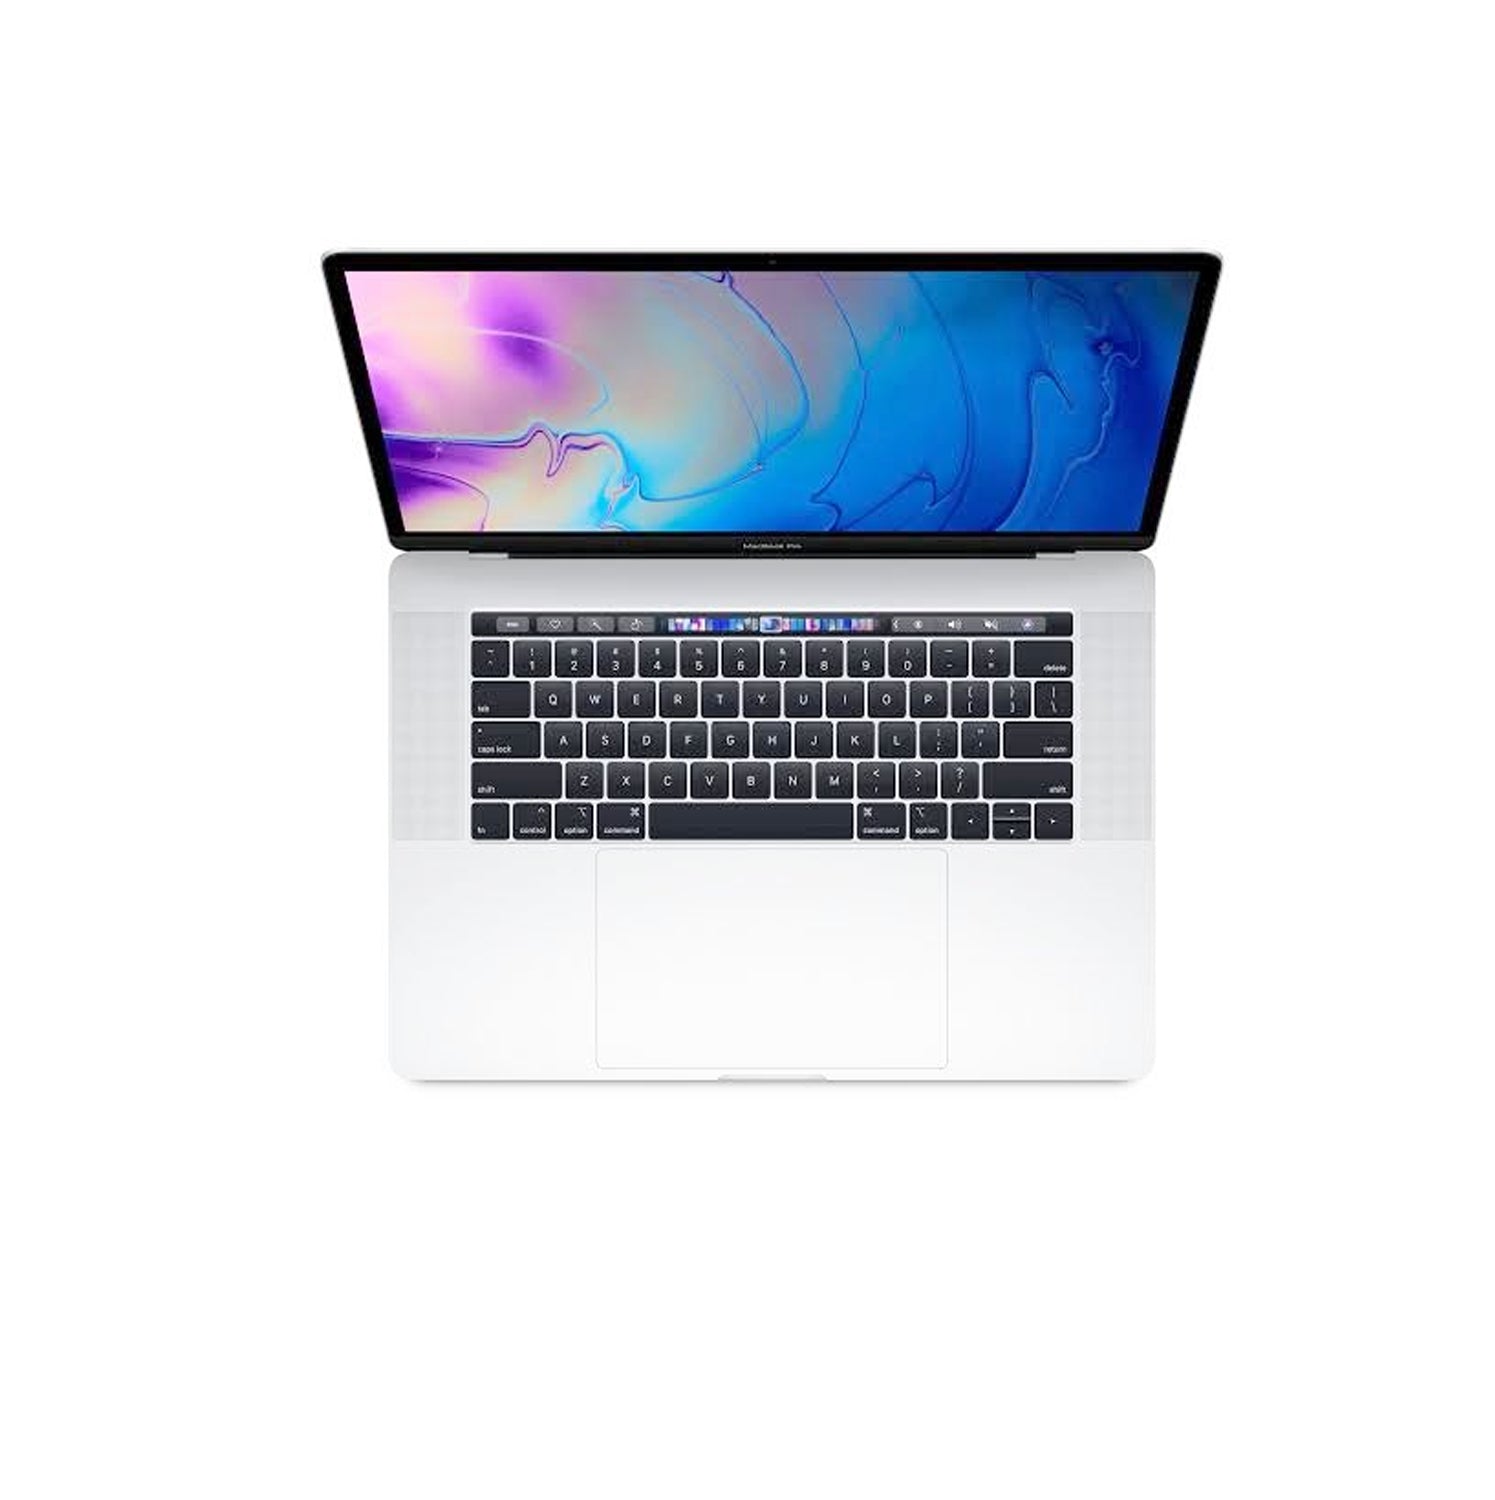 Apple MacBook Pro 15-inch with Touch Bar 256GB - Silver (Spanish Keyboard) MR962E/A with Cleaning Kit